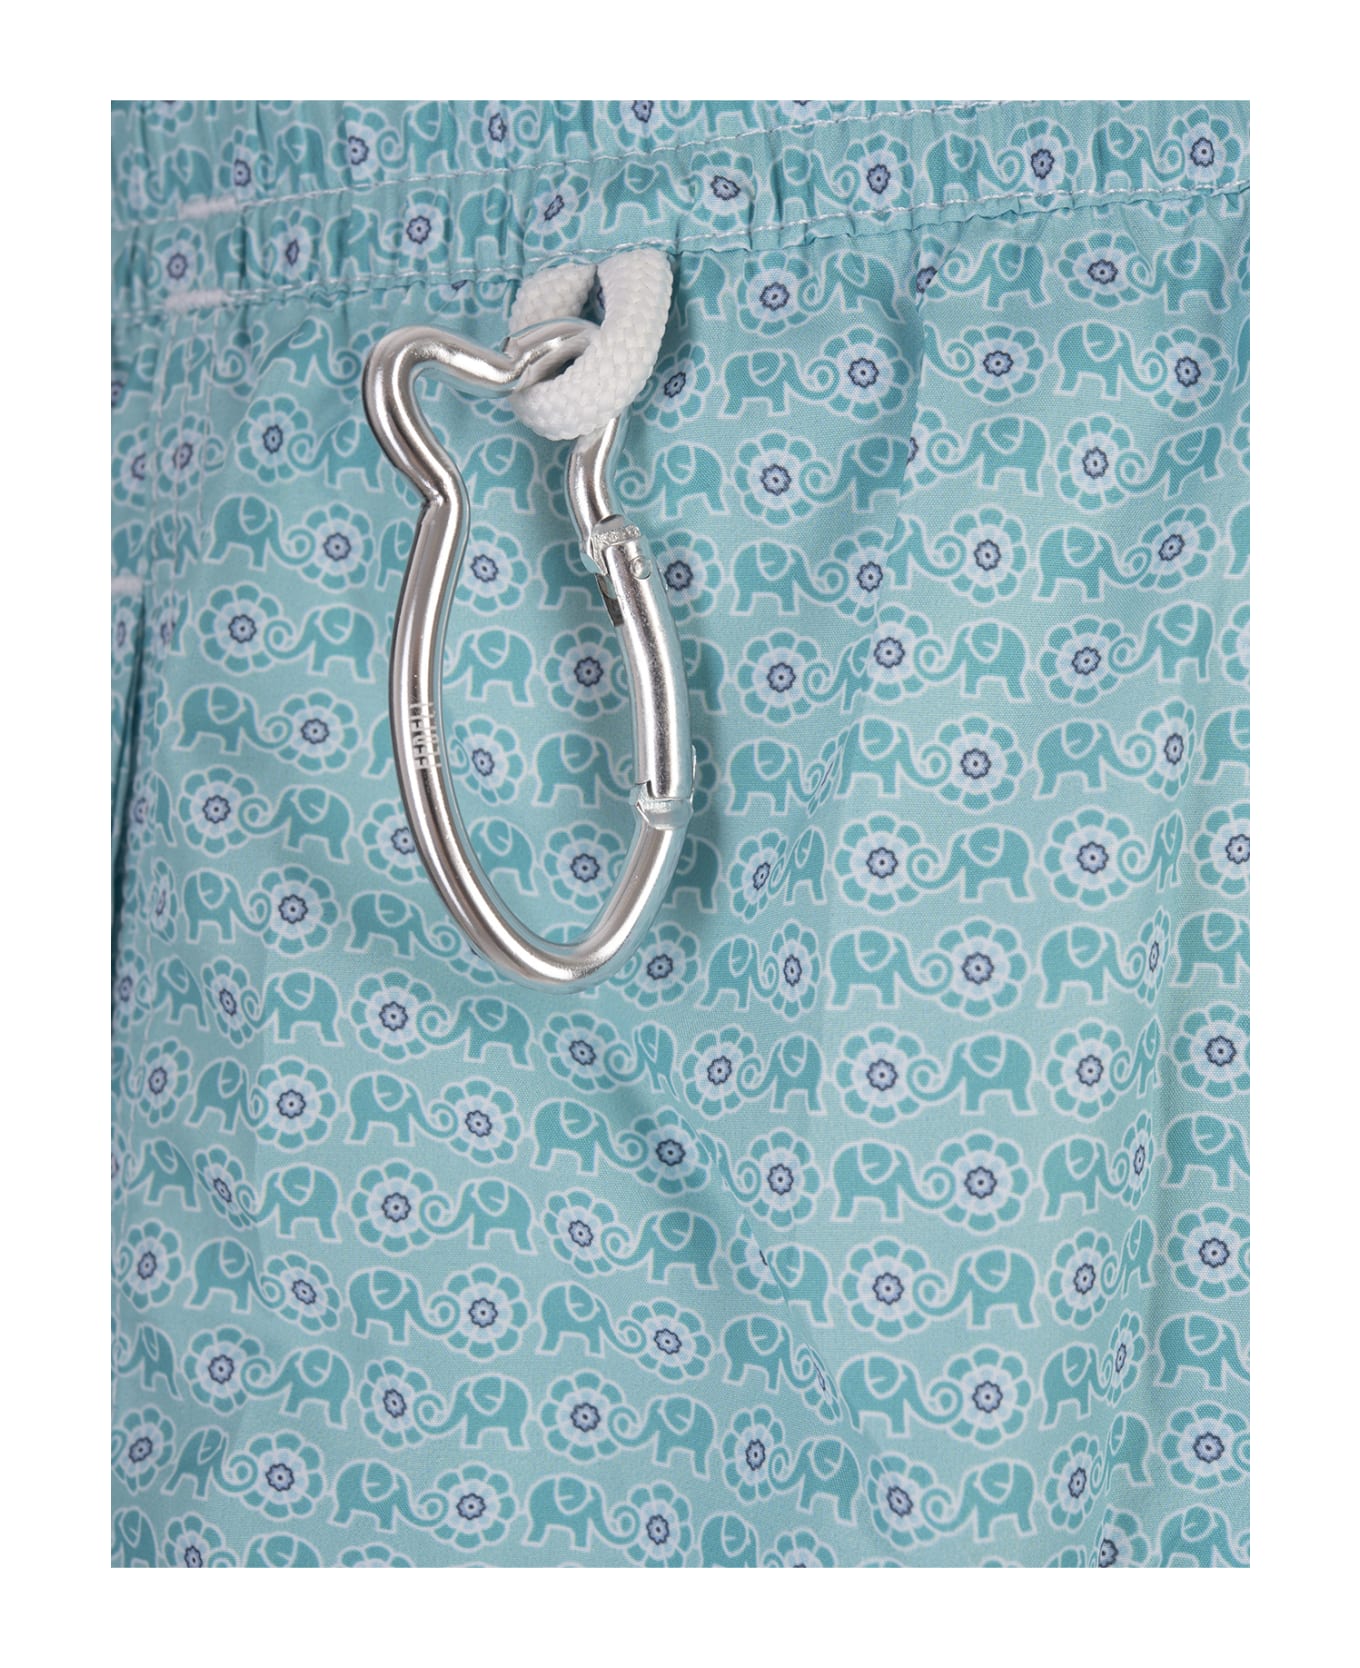 Fedeli Turquoise Swim Shorts With Elephants And Flowers Pattern - Green